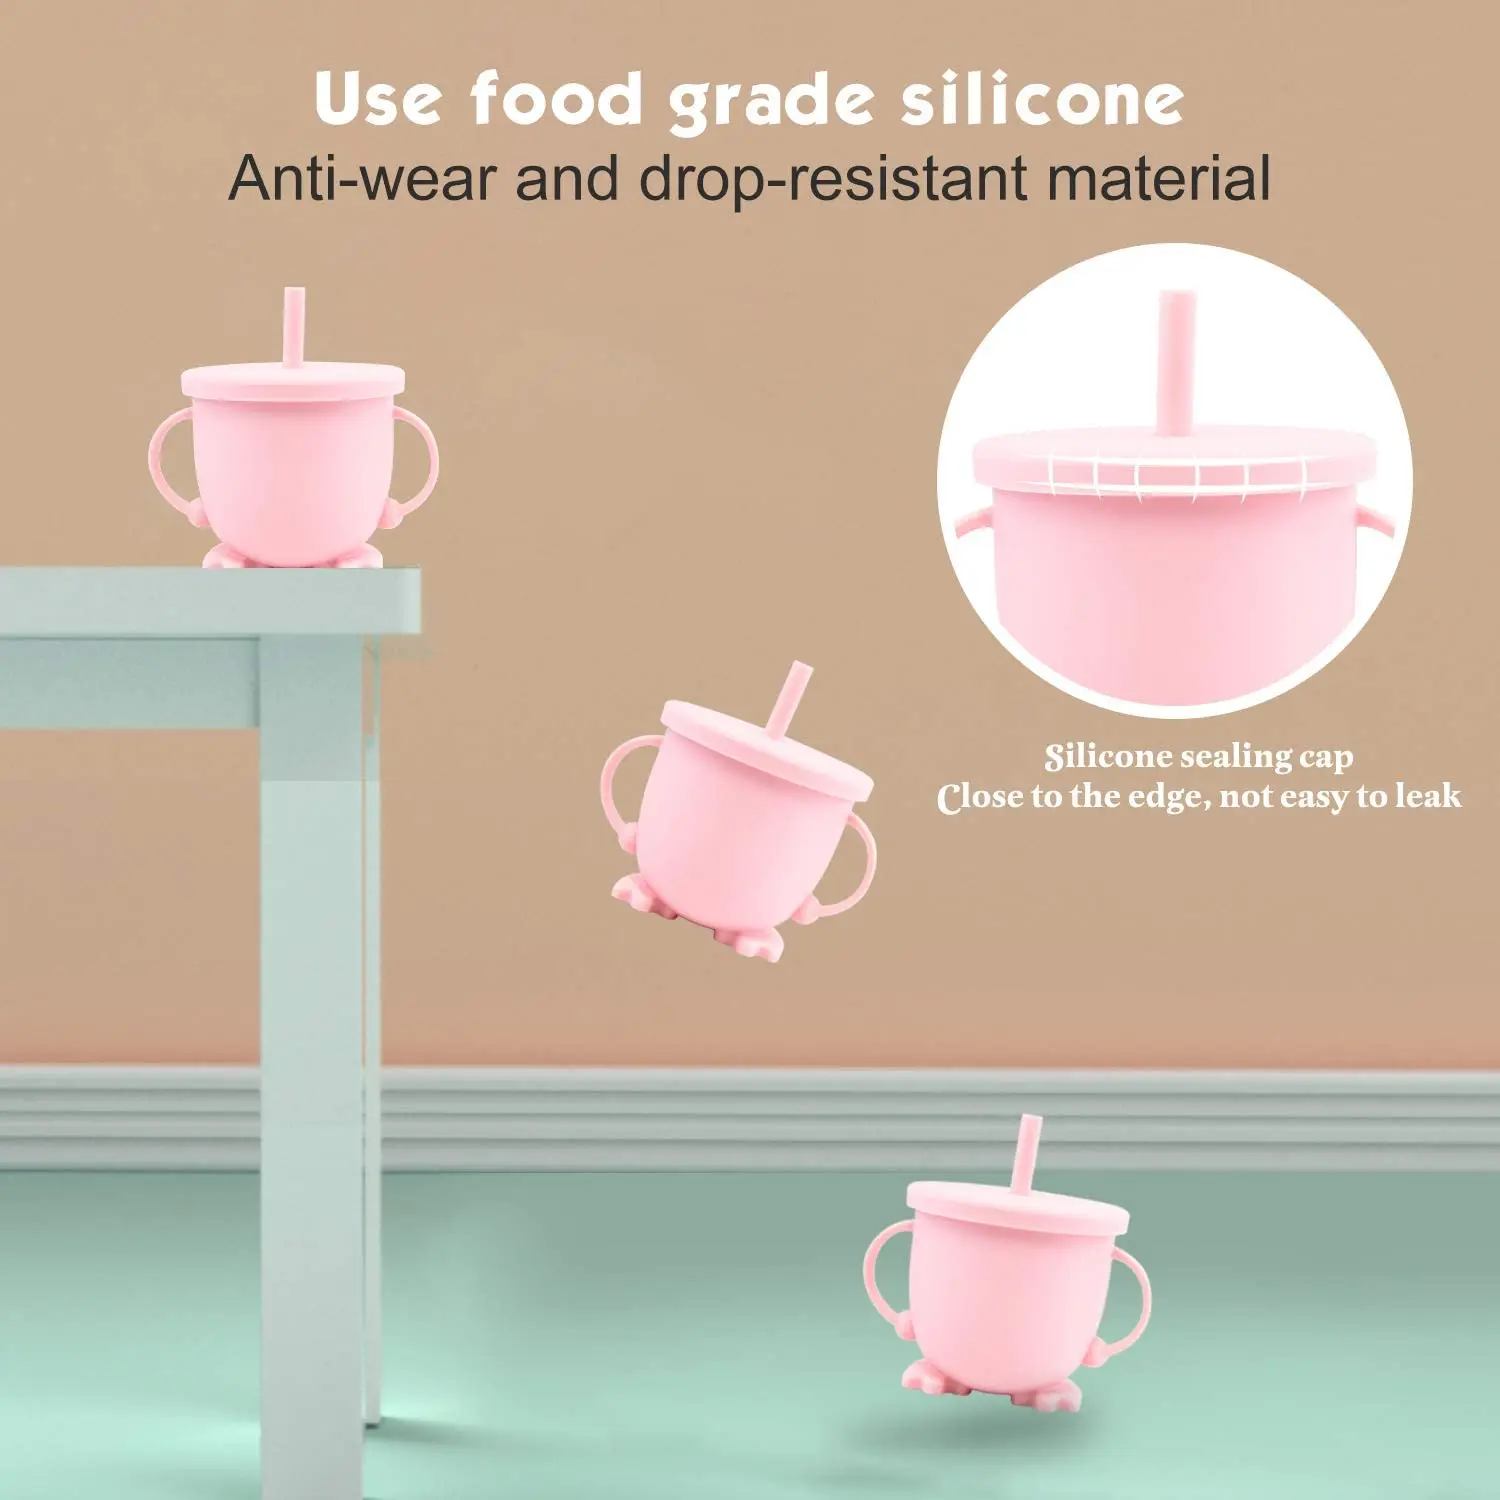 https://ae01.alicdn.com/kf/Hf866317c7b9b440e978cfd3b4cdb2c7bP/2-in-1-Snack-Cup-Silicone-Baby-Cup-Spill-Proof-Sippy-Cup-Silicone-Cup-Kids-with.jpg